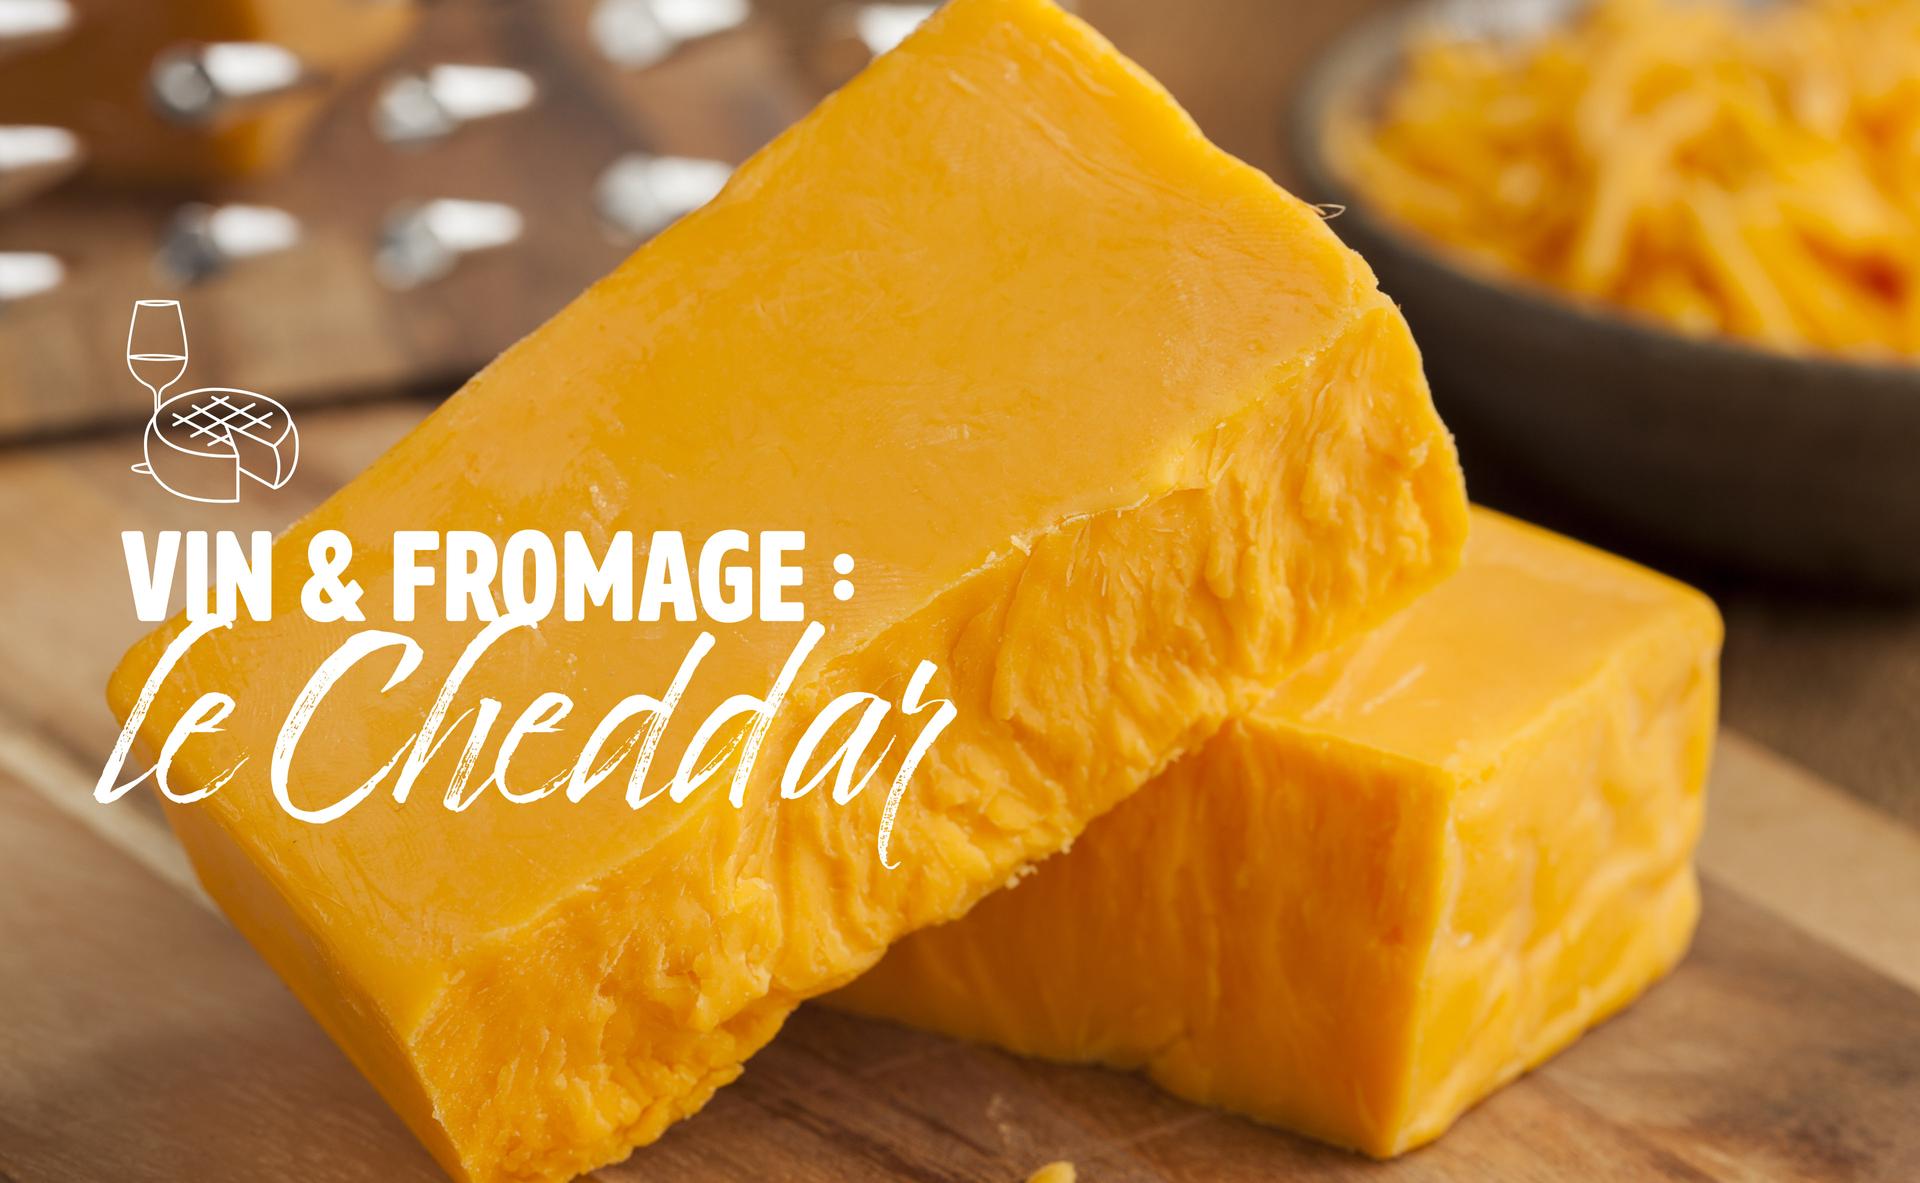 Vin & Fromage : le Cheddar